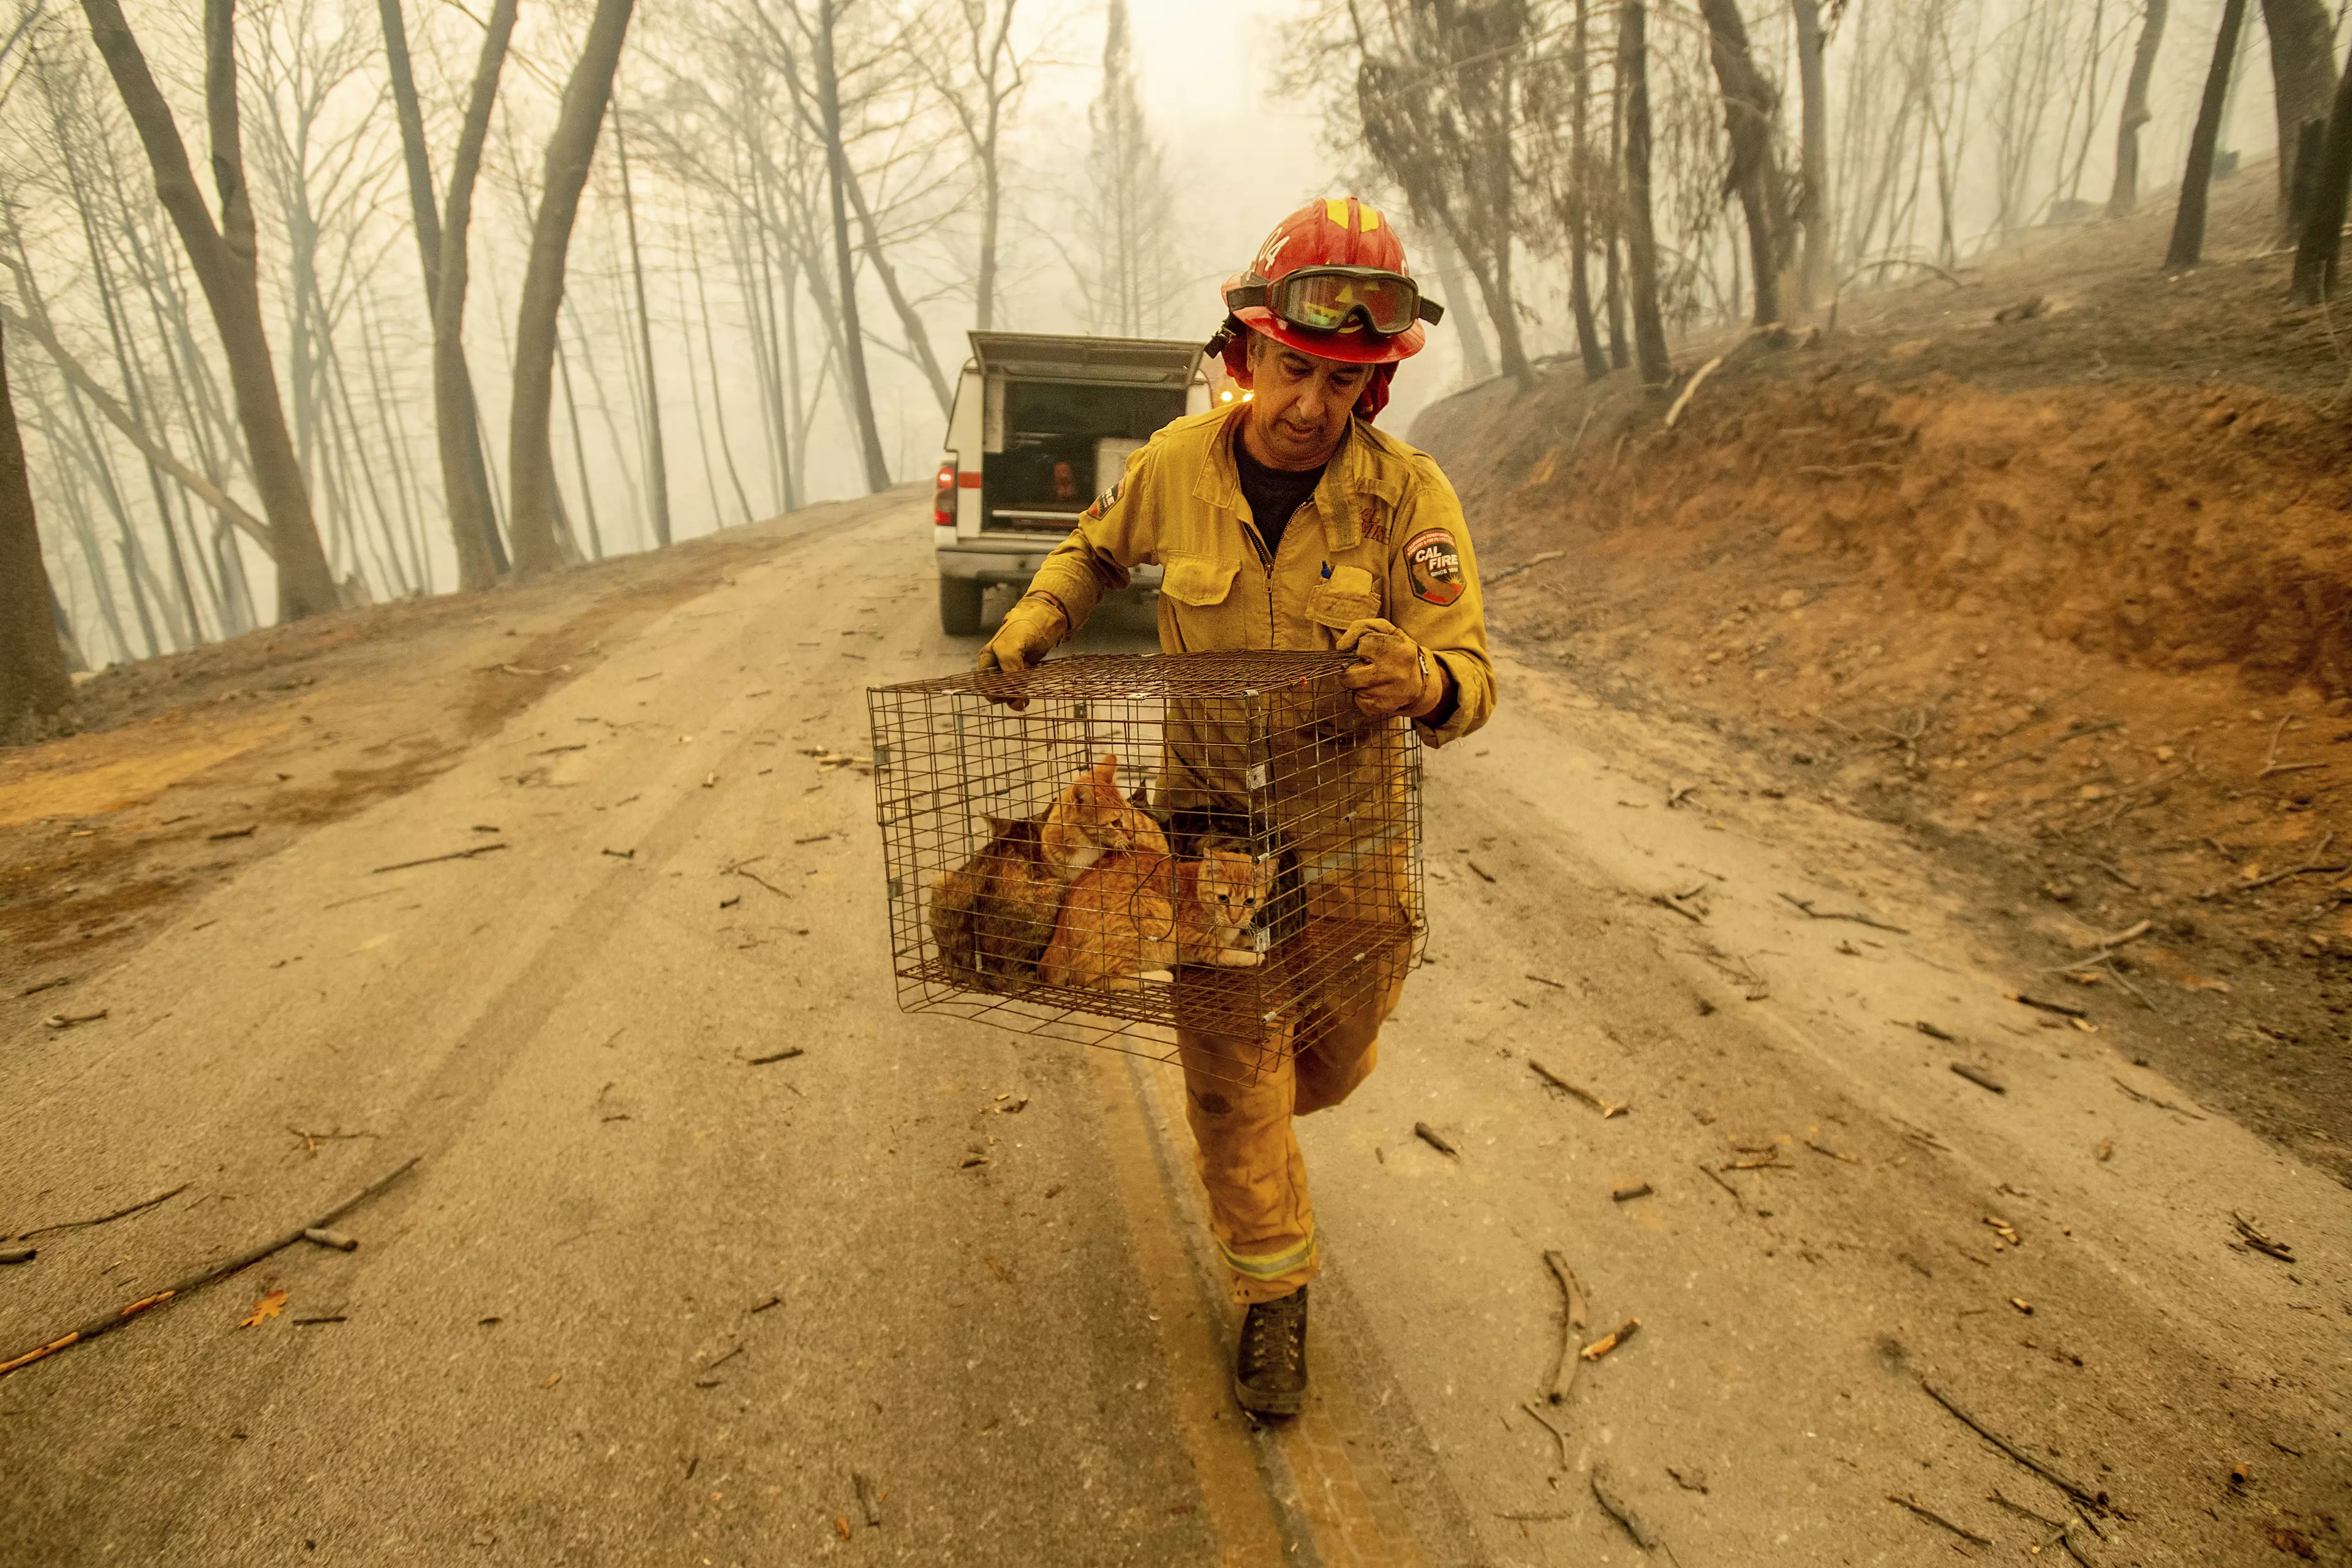 Capt. Steve Millosovich carries a cage of cats while battling the Camp Fire in Big Bend.